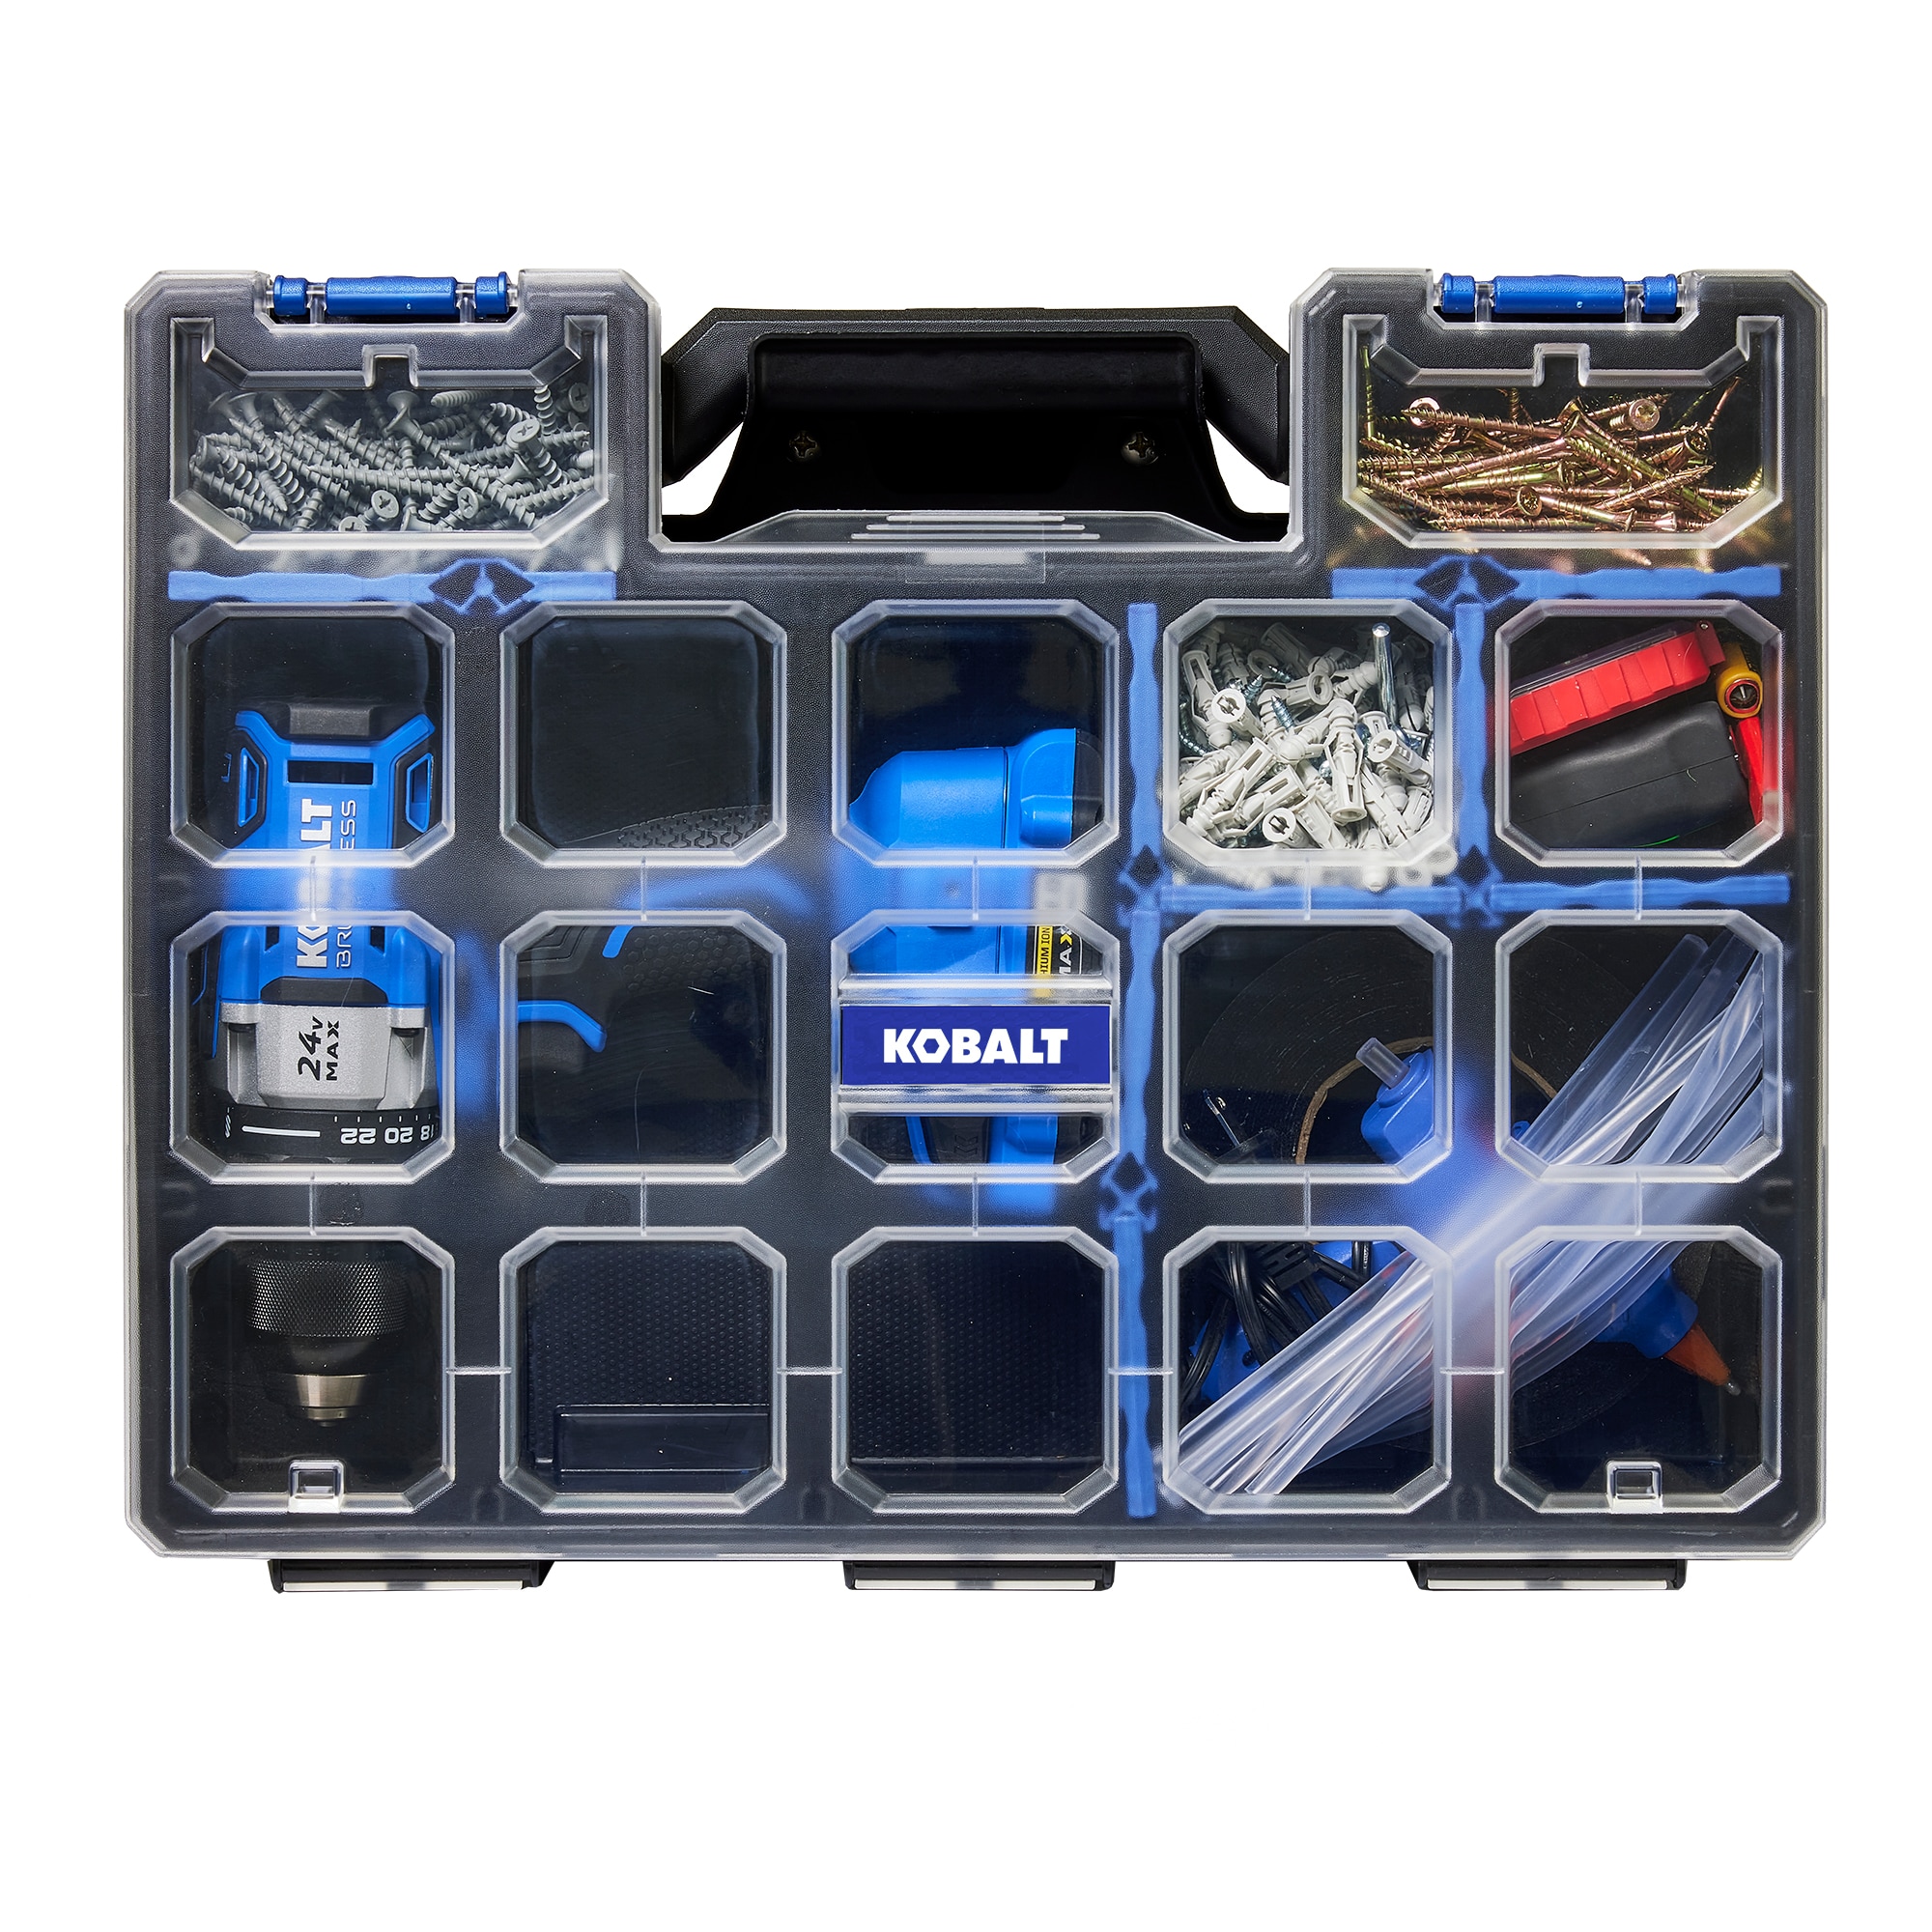 17 Heavy Duty Interlocking Organizer with Clear Lid for Storage and Tool  Organization - with 12 Removable Caps, Secured Metal Latches for Locking